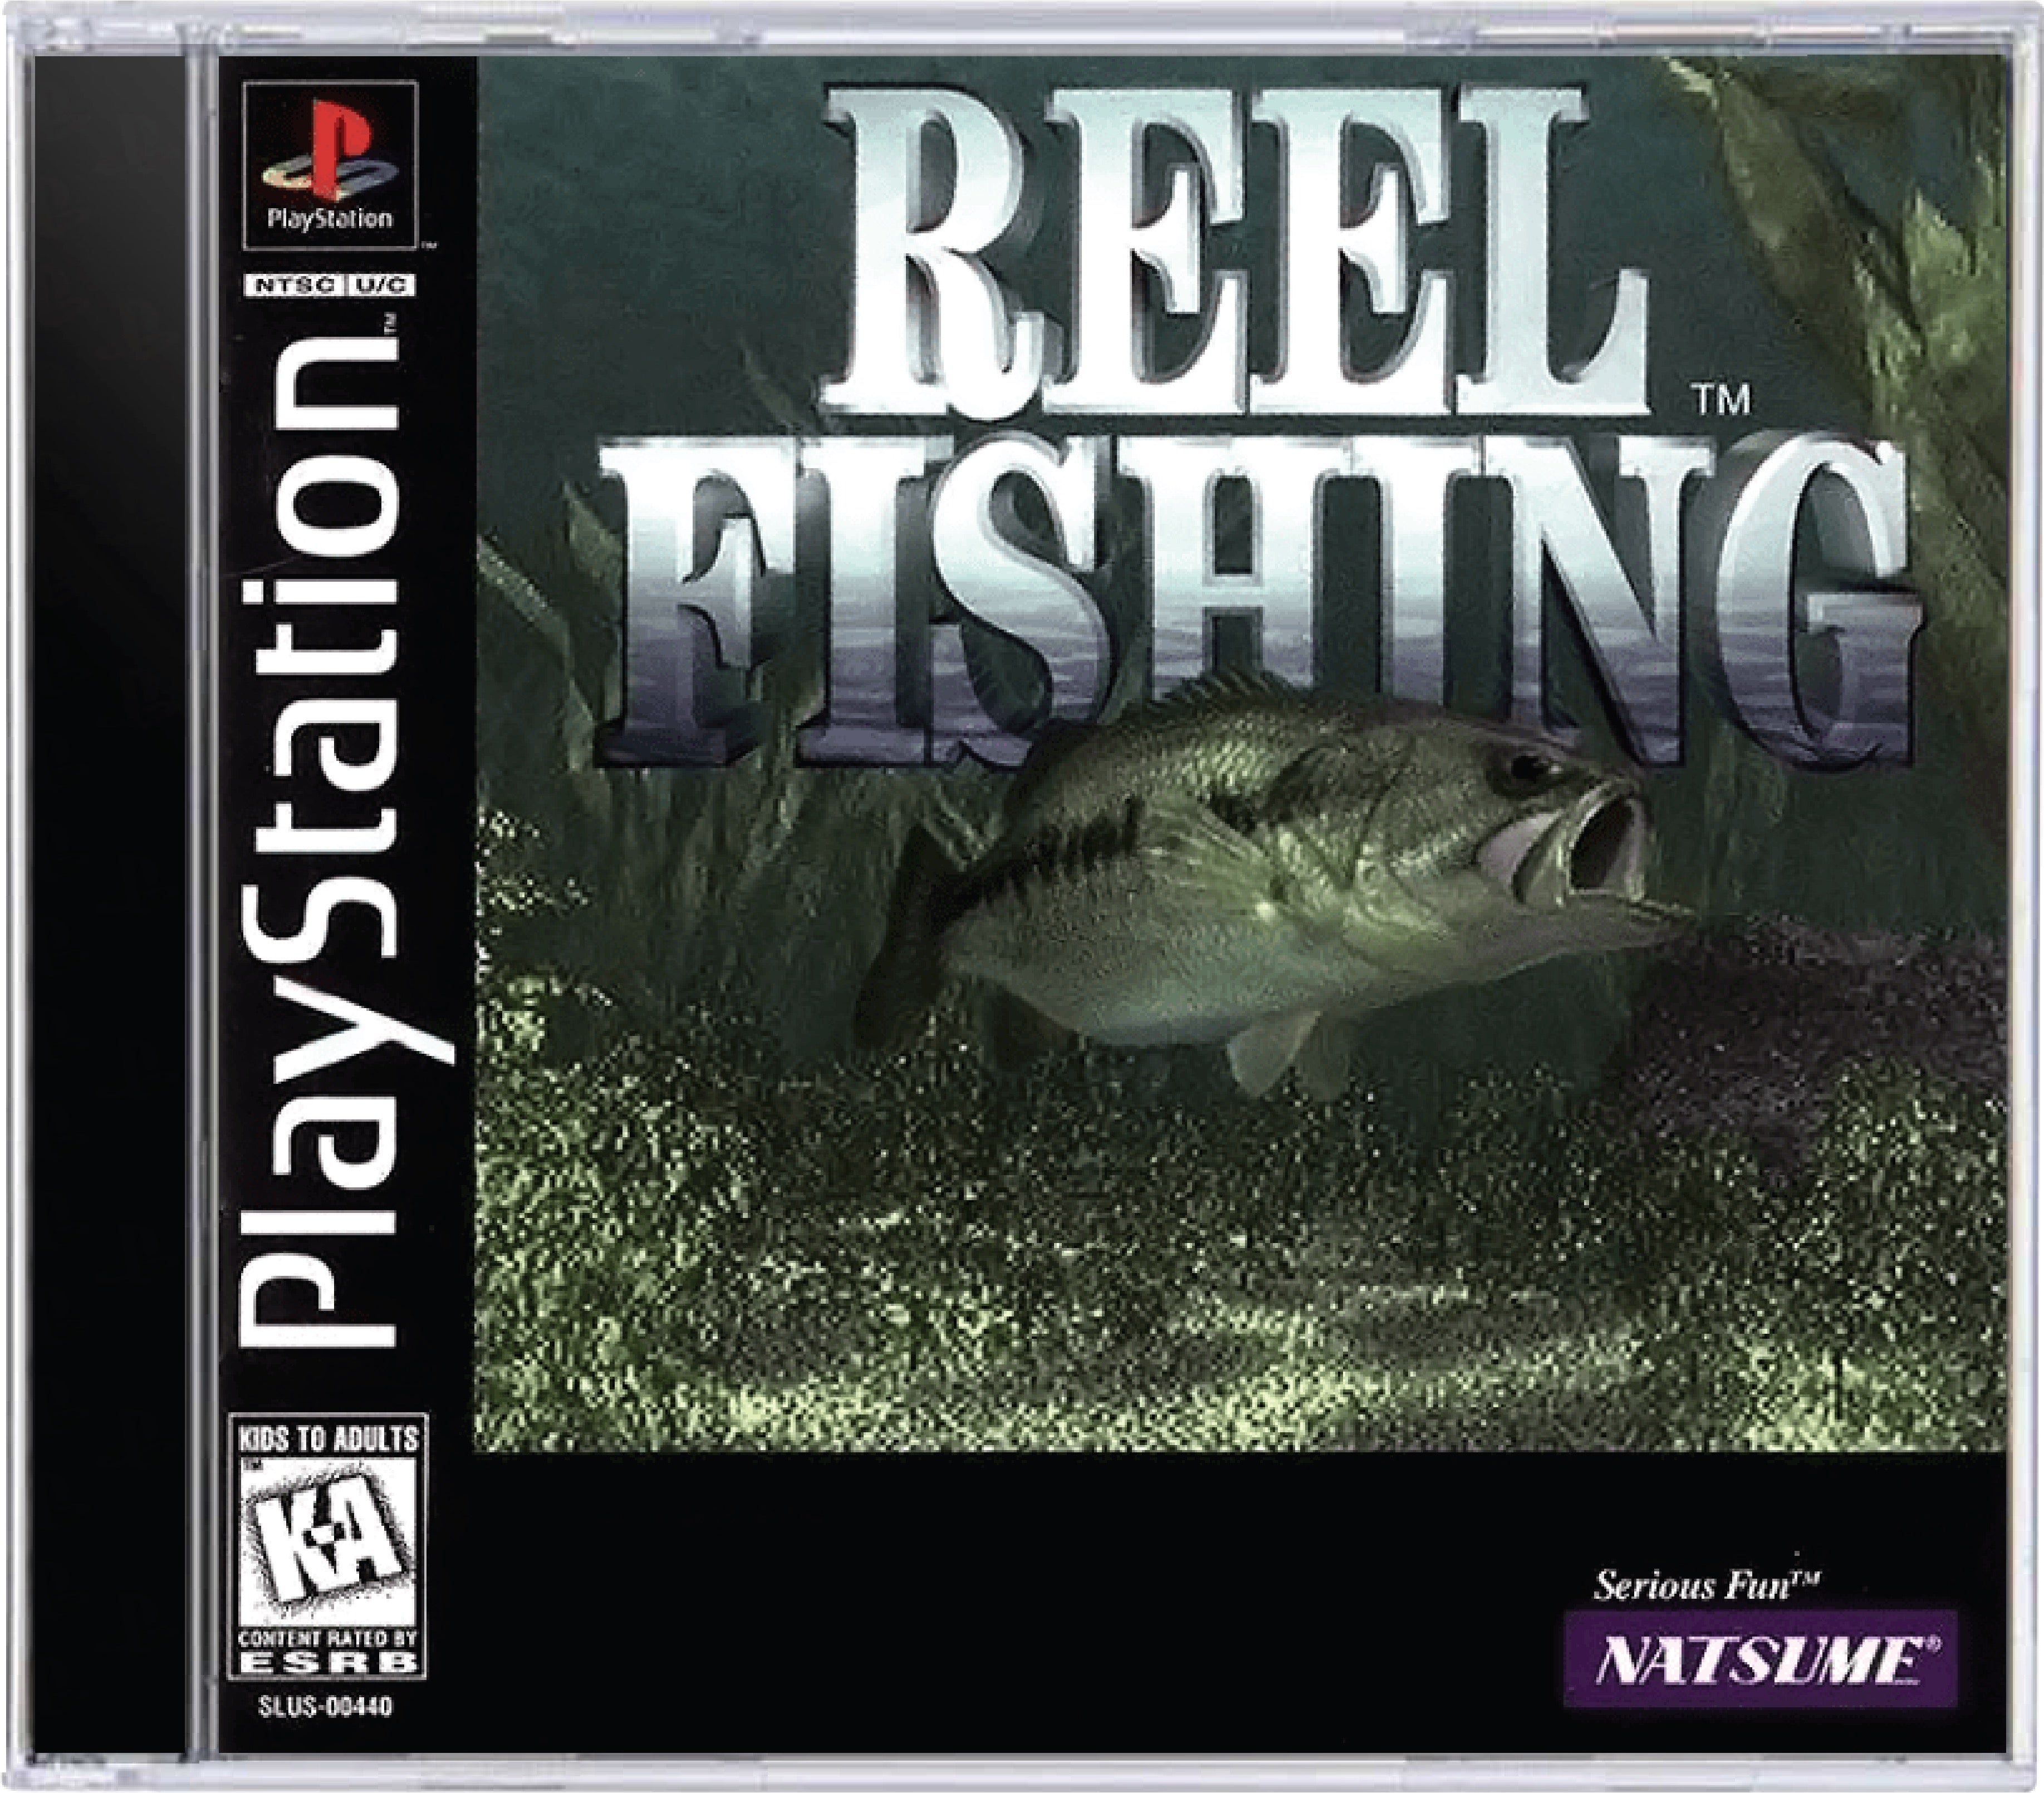 Reel Fishing Cover Art and Product Photo